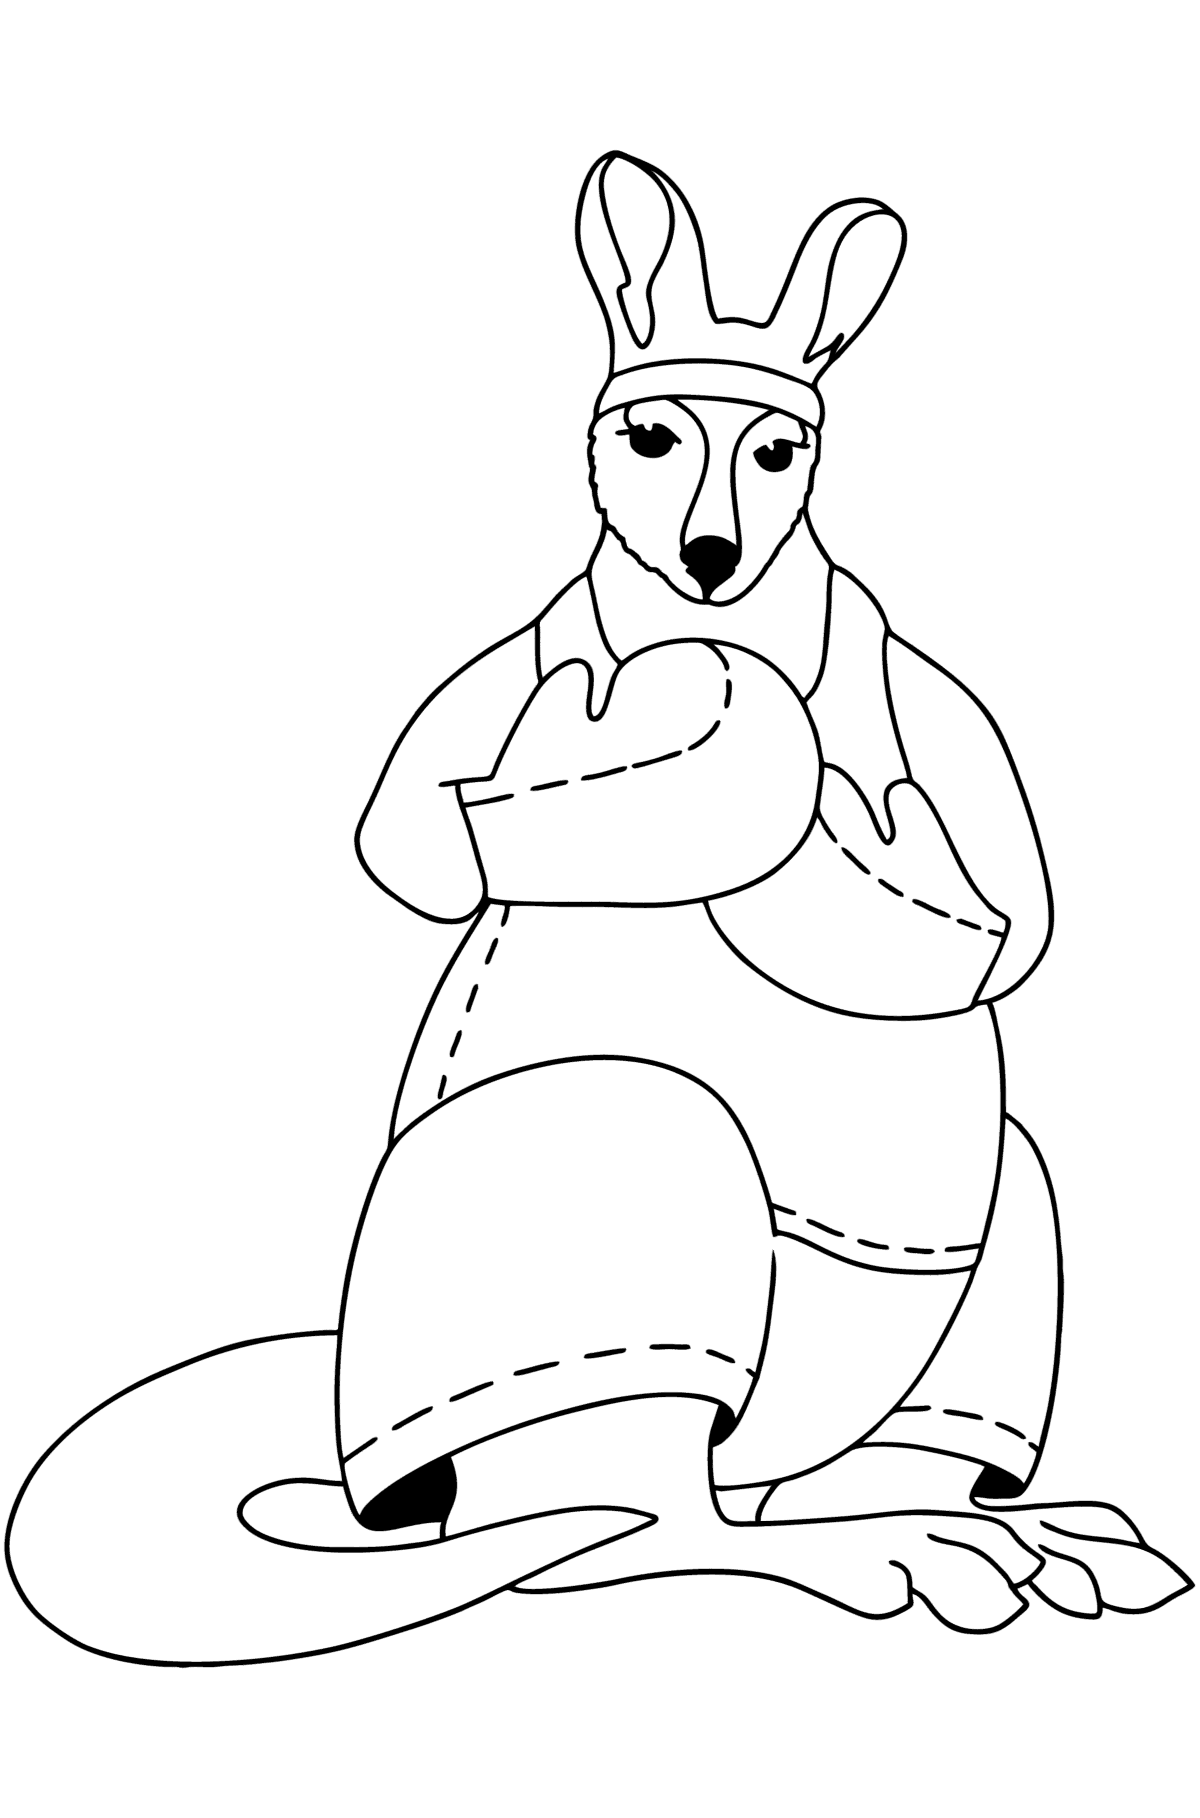 Kangaroo Boxer coloring page - Coloring Pages for Kids